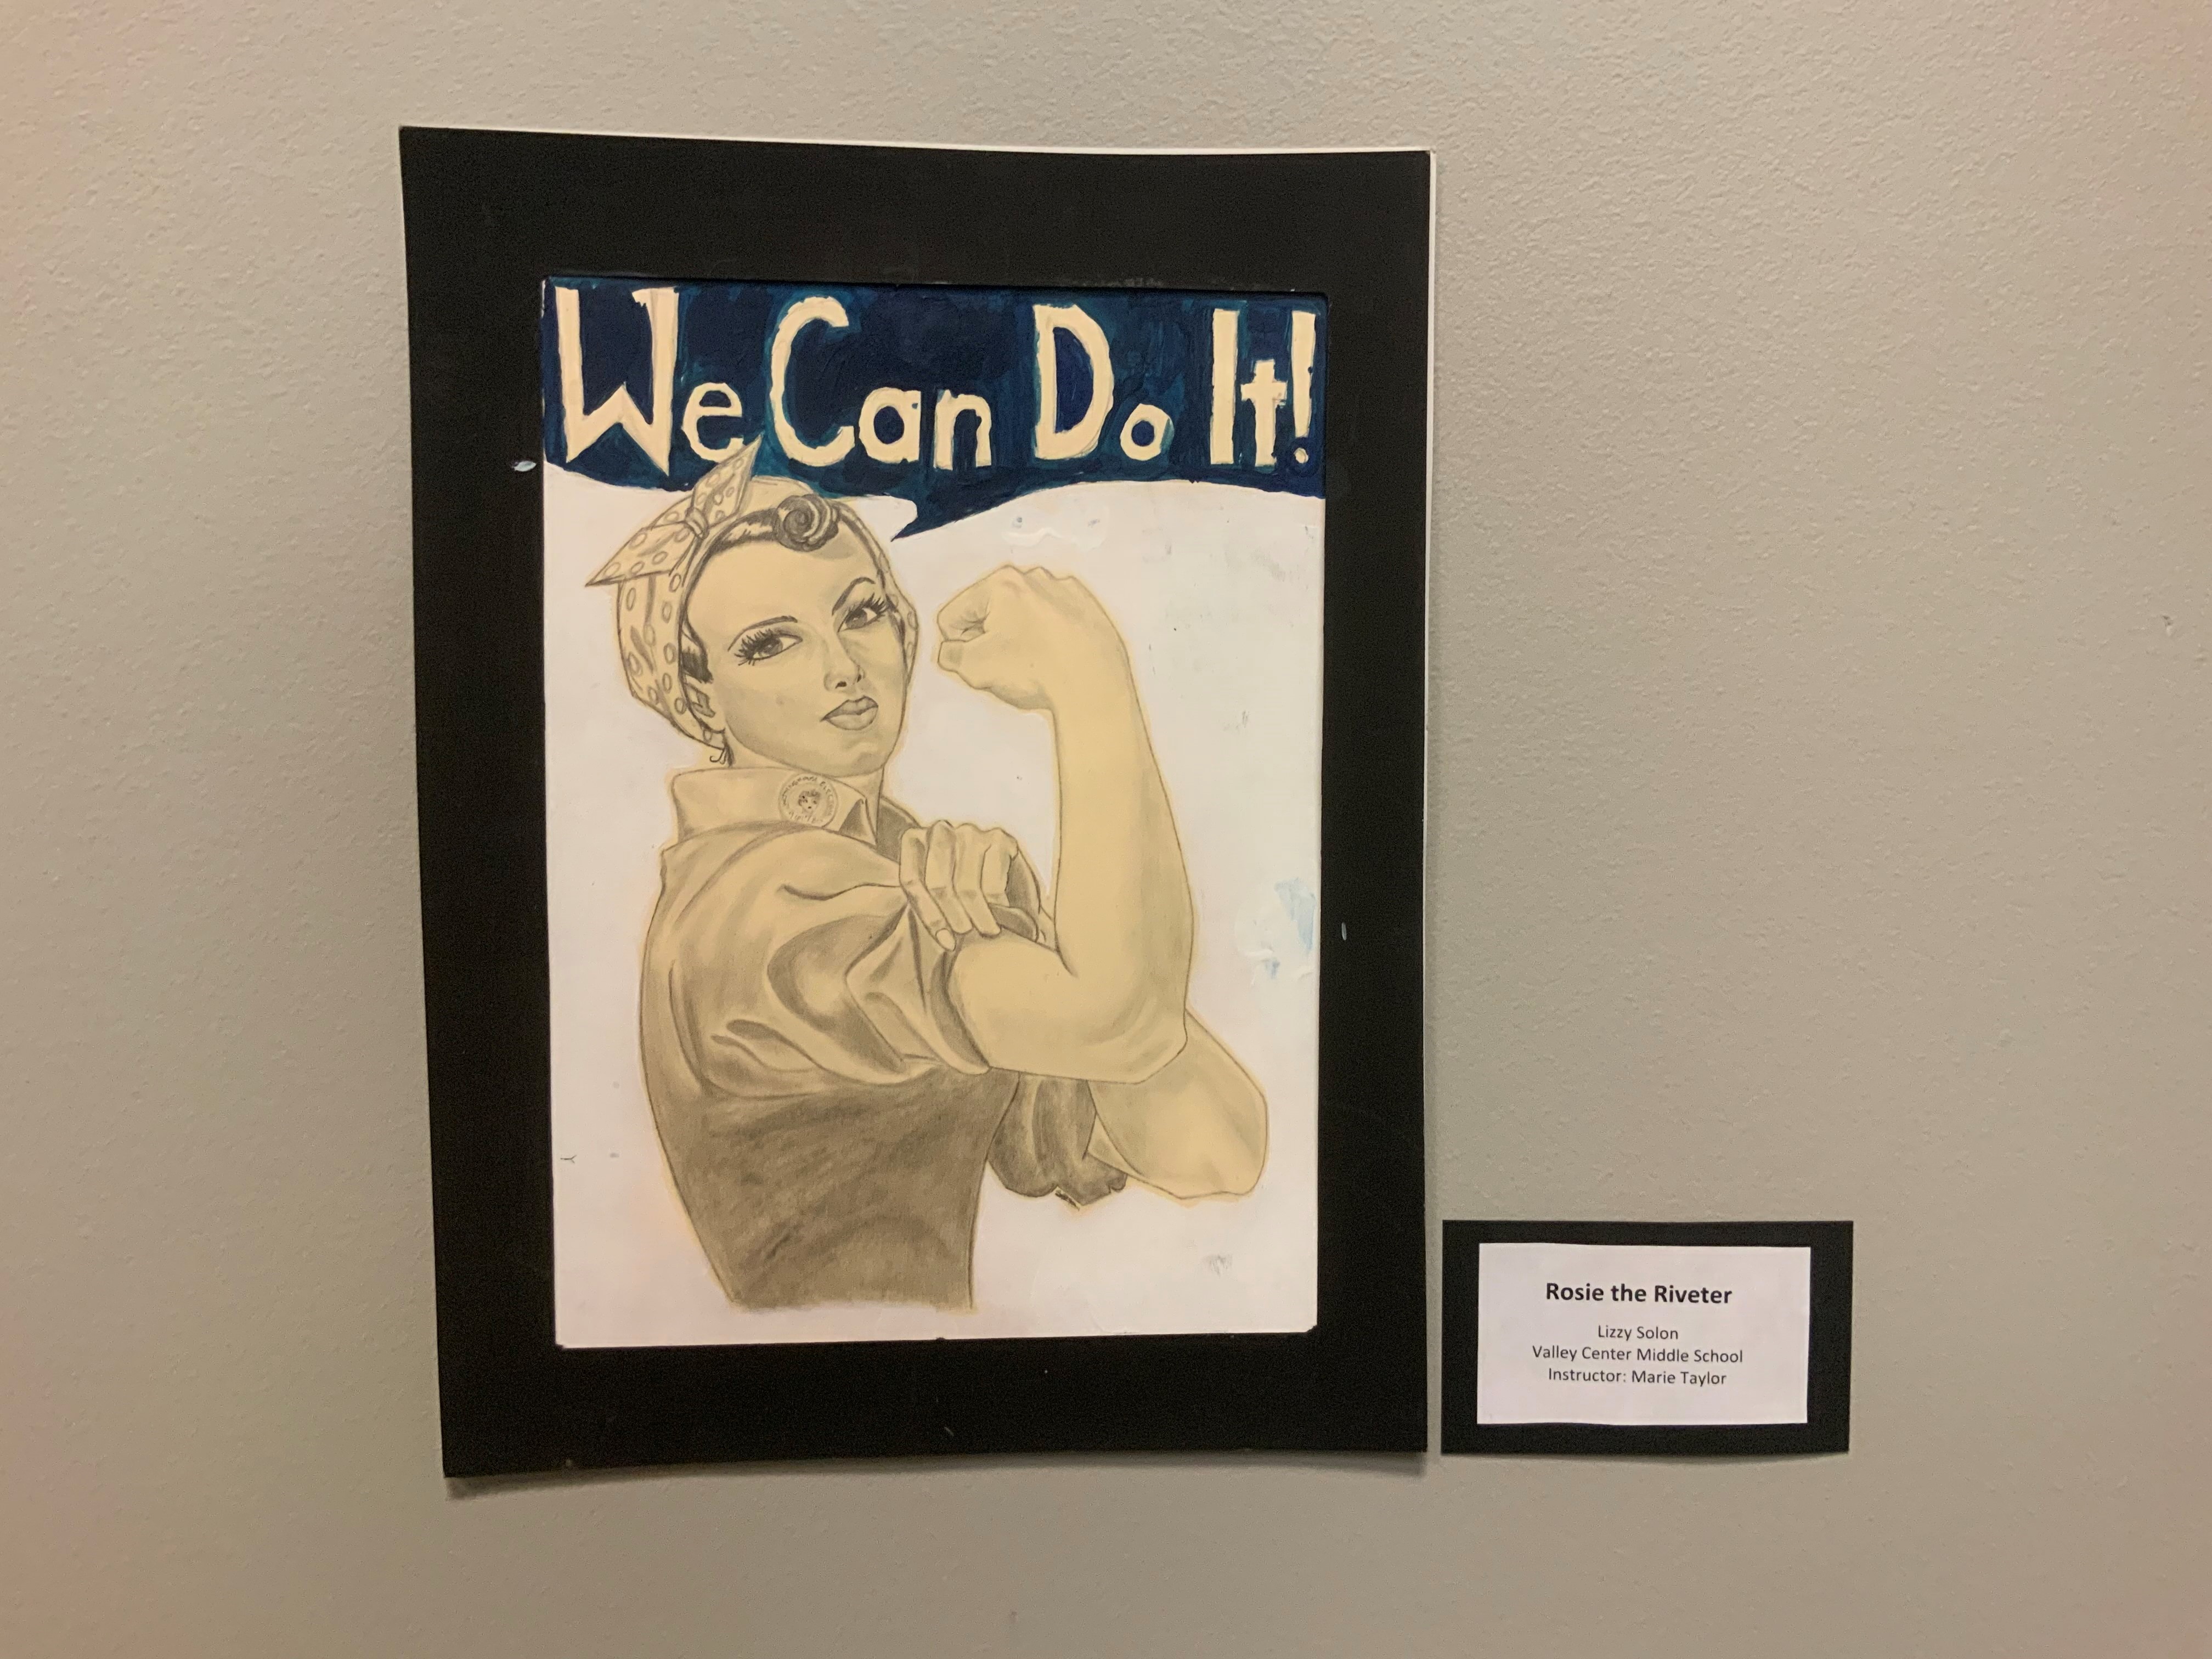 Rosie The Riveter by Lizzy Solon